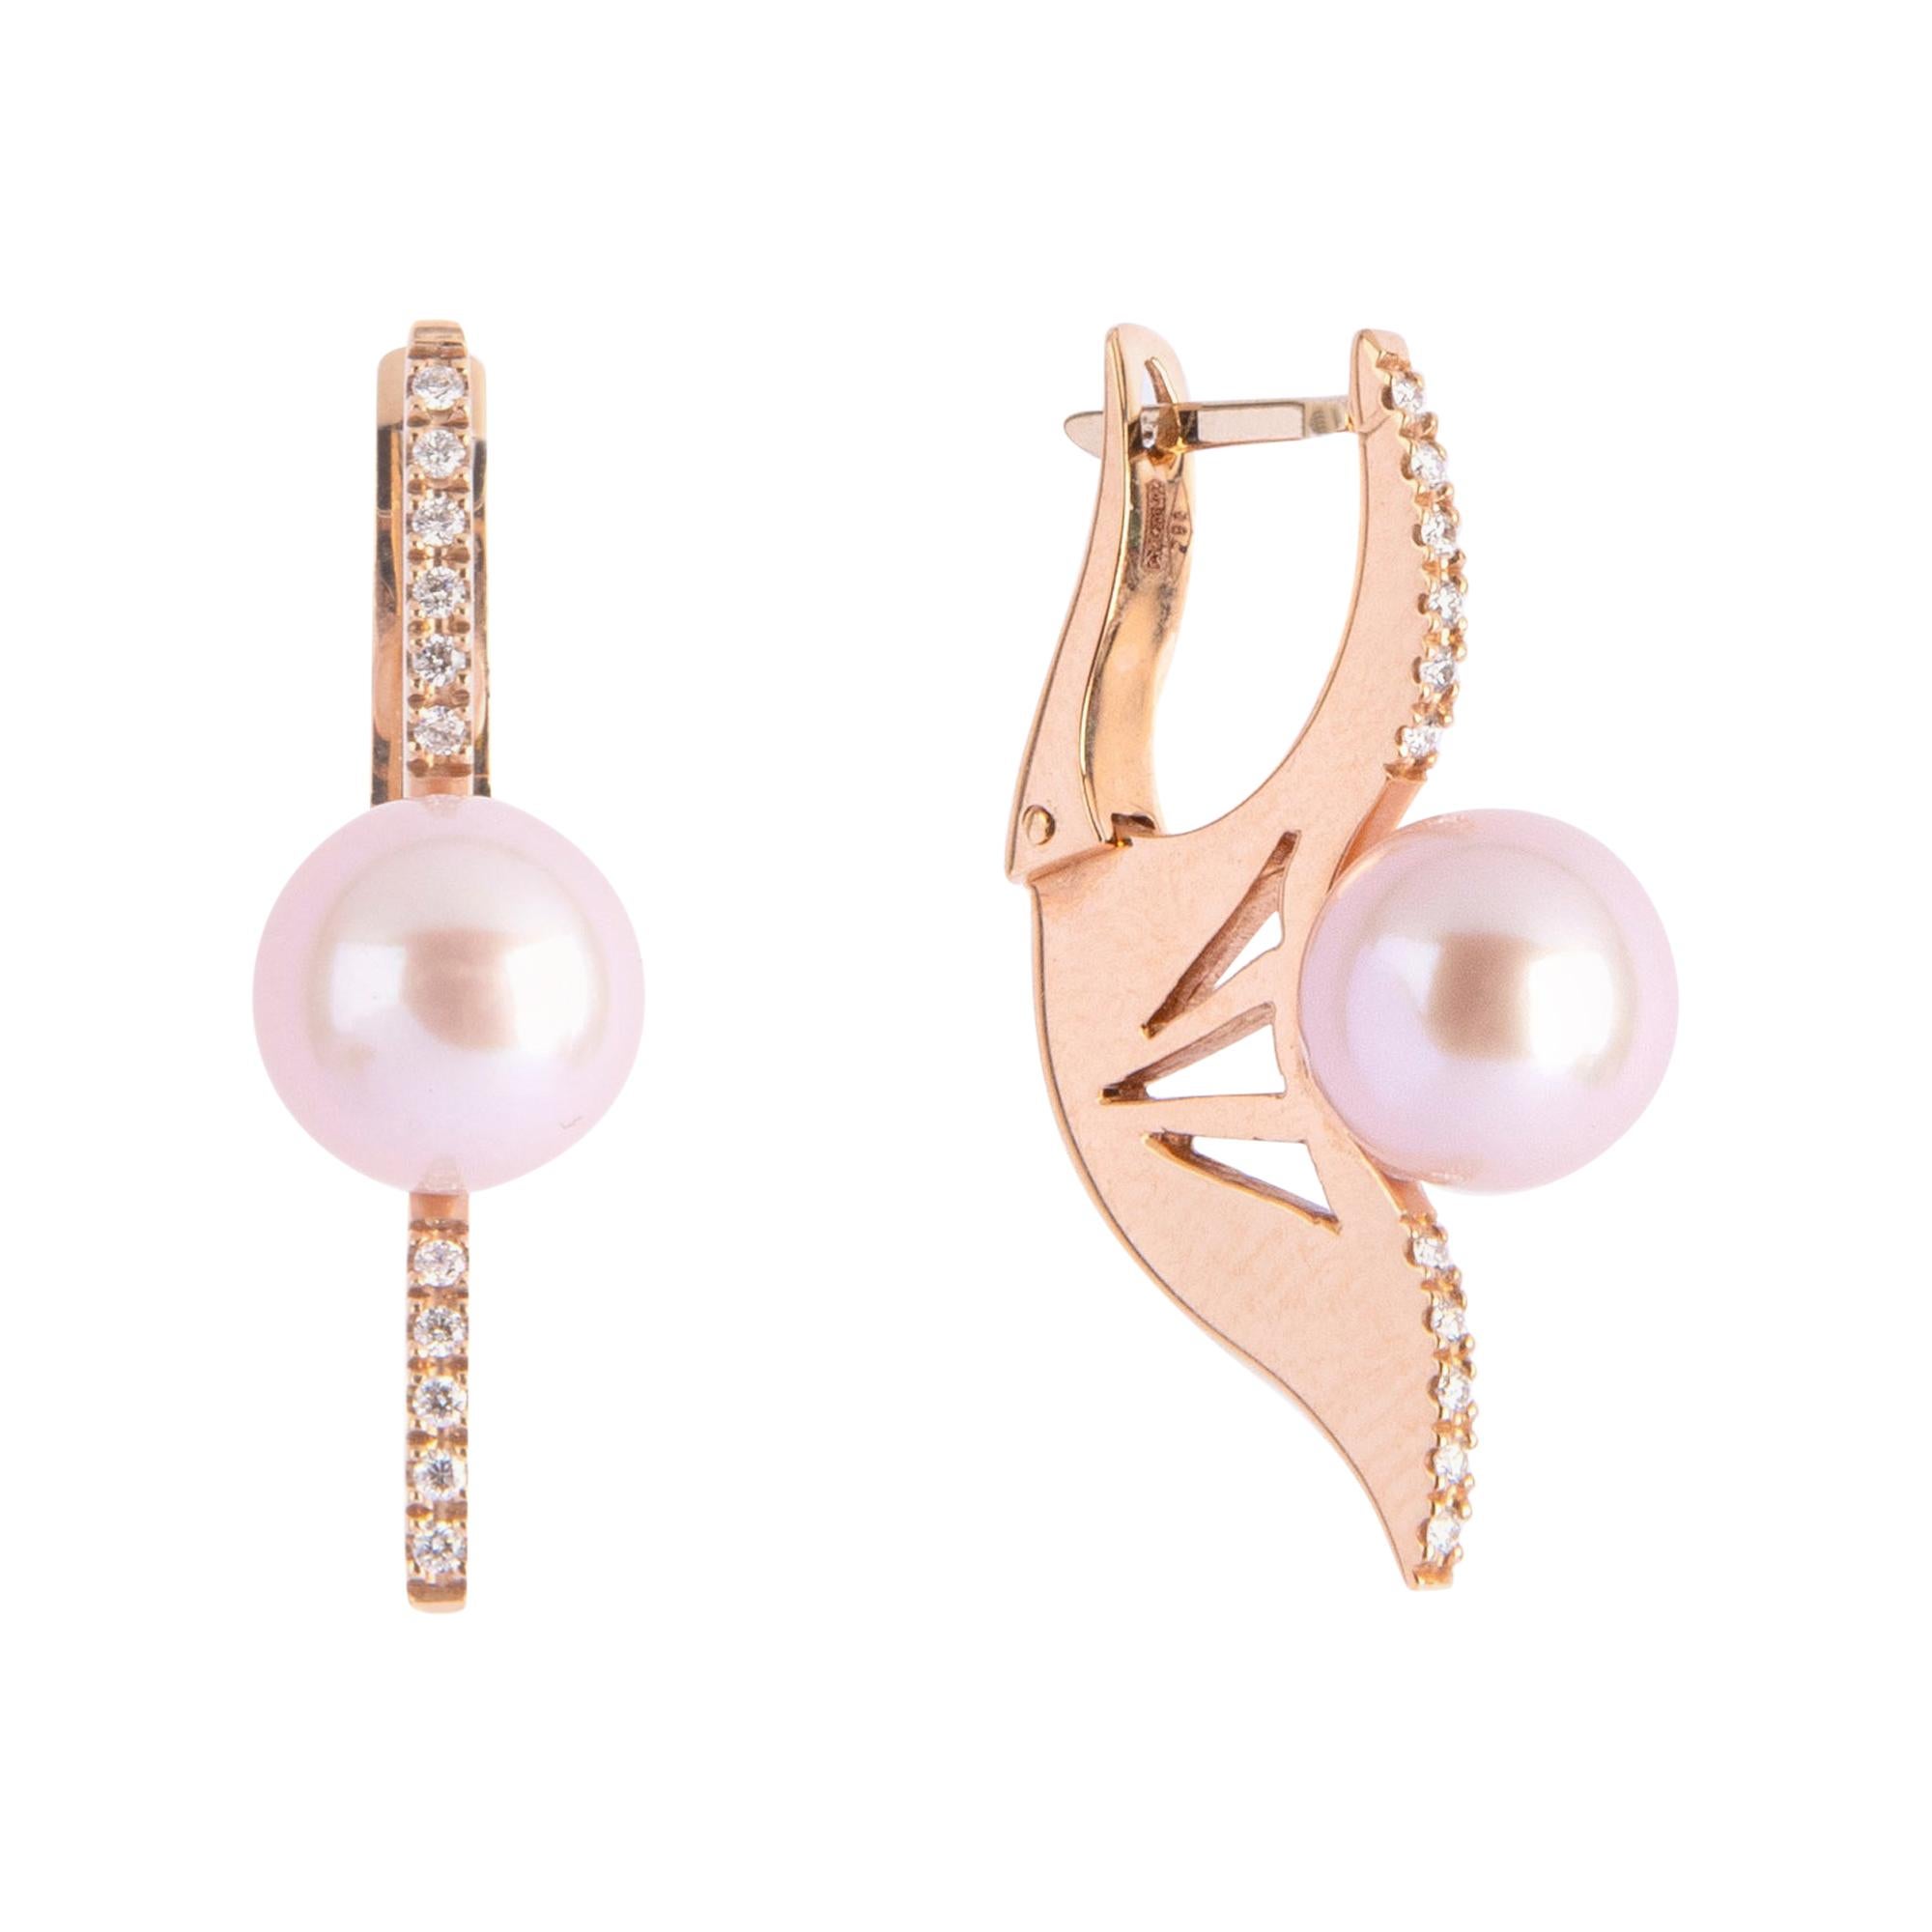 Yellow Gold Earrings with Japanese Pearls and Diamonds by Giancarlo Montebello